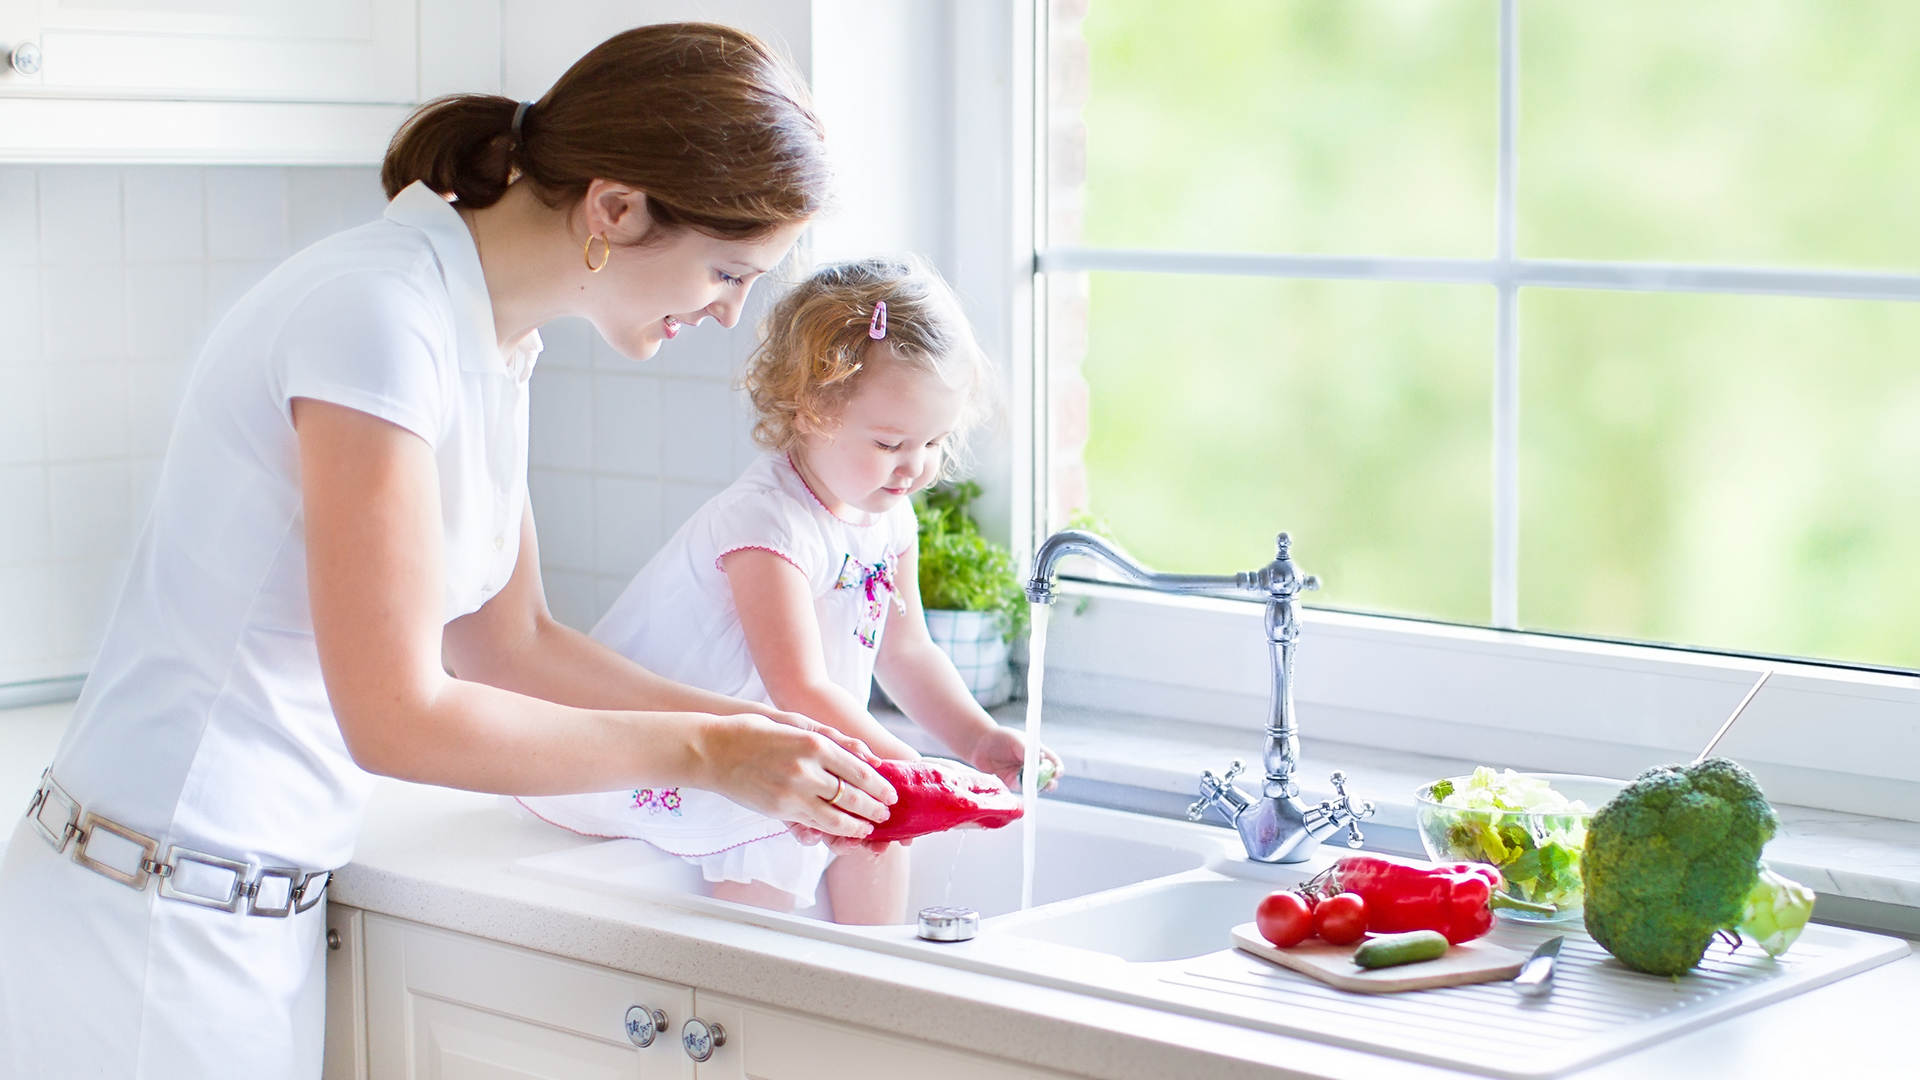 A Comprehensive Range Of Plumbing Services